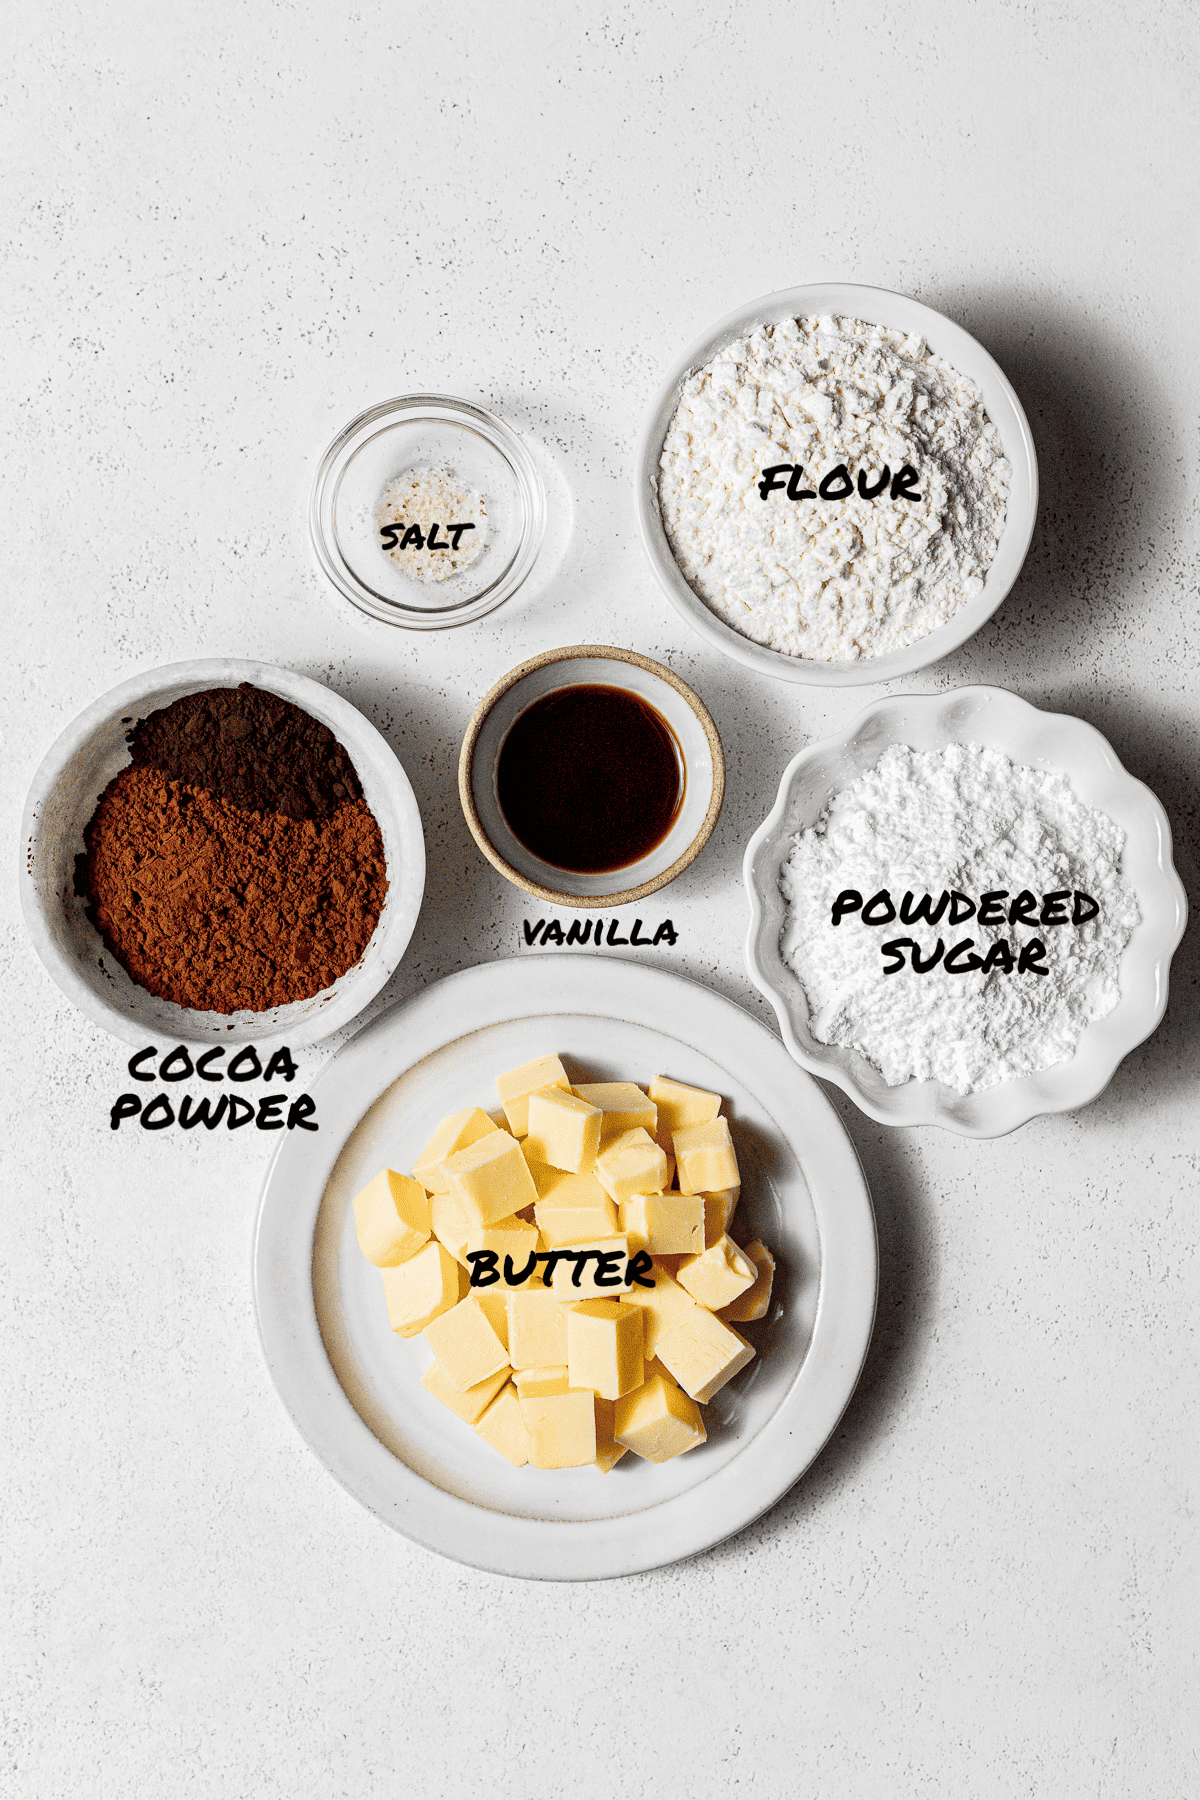 ingredients for the chocolate shortbread.